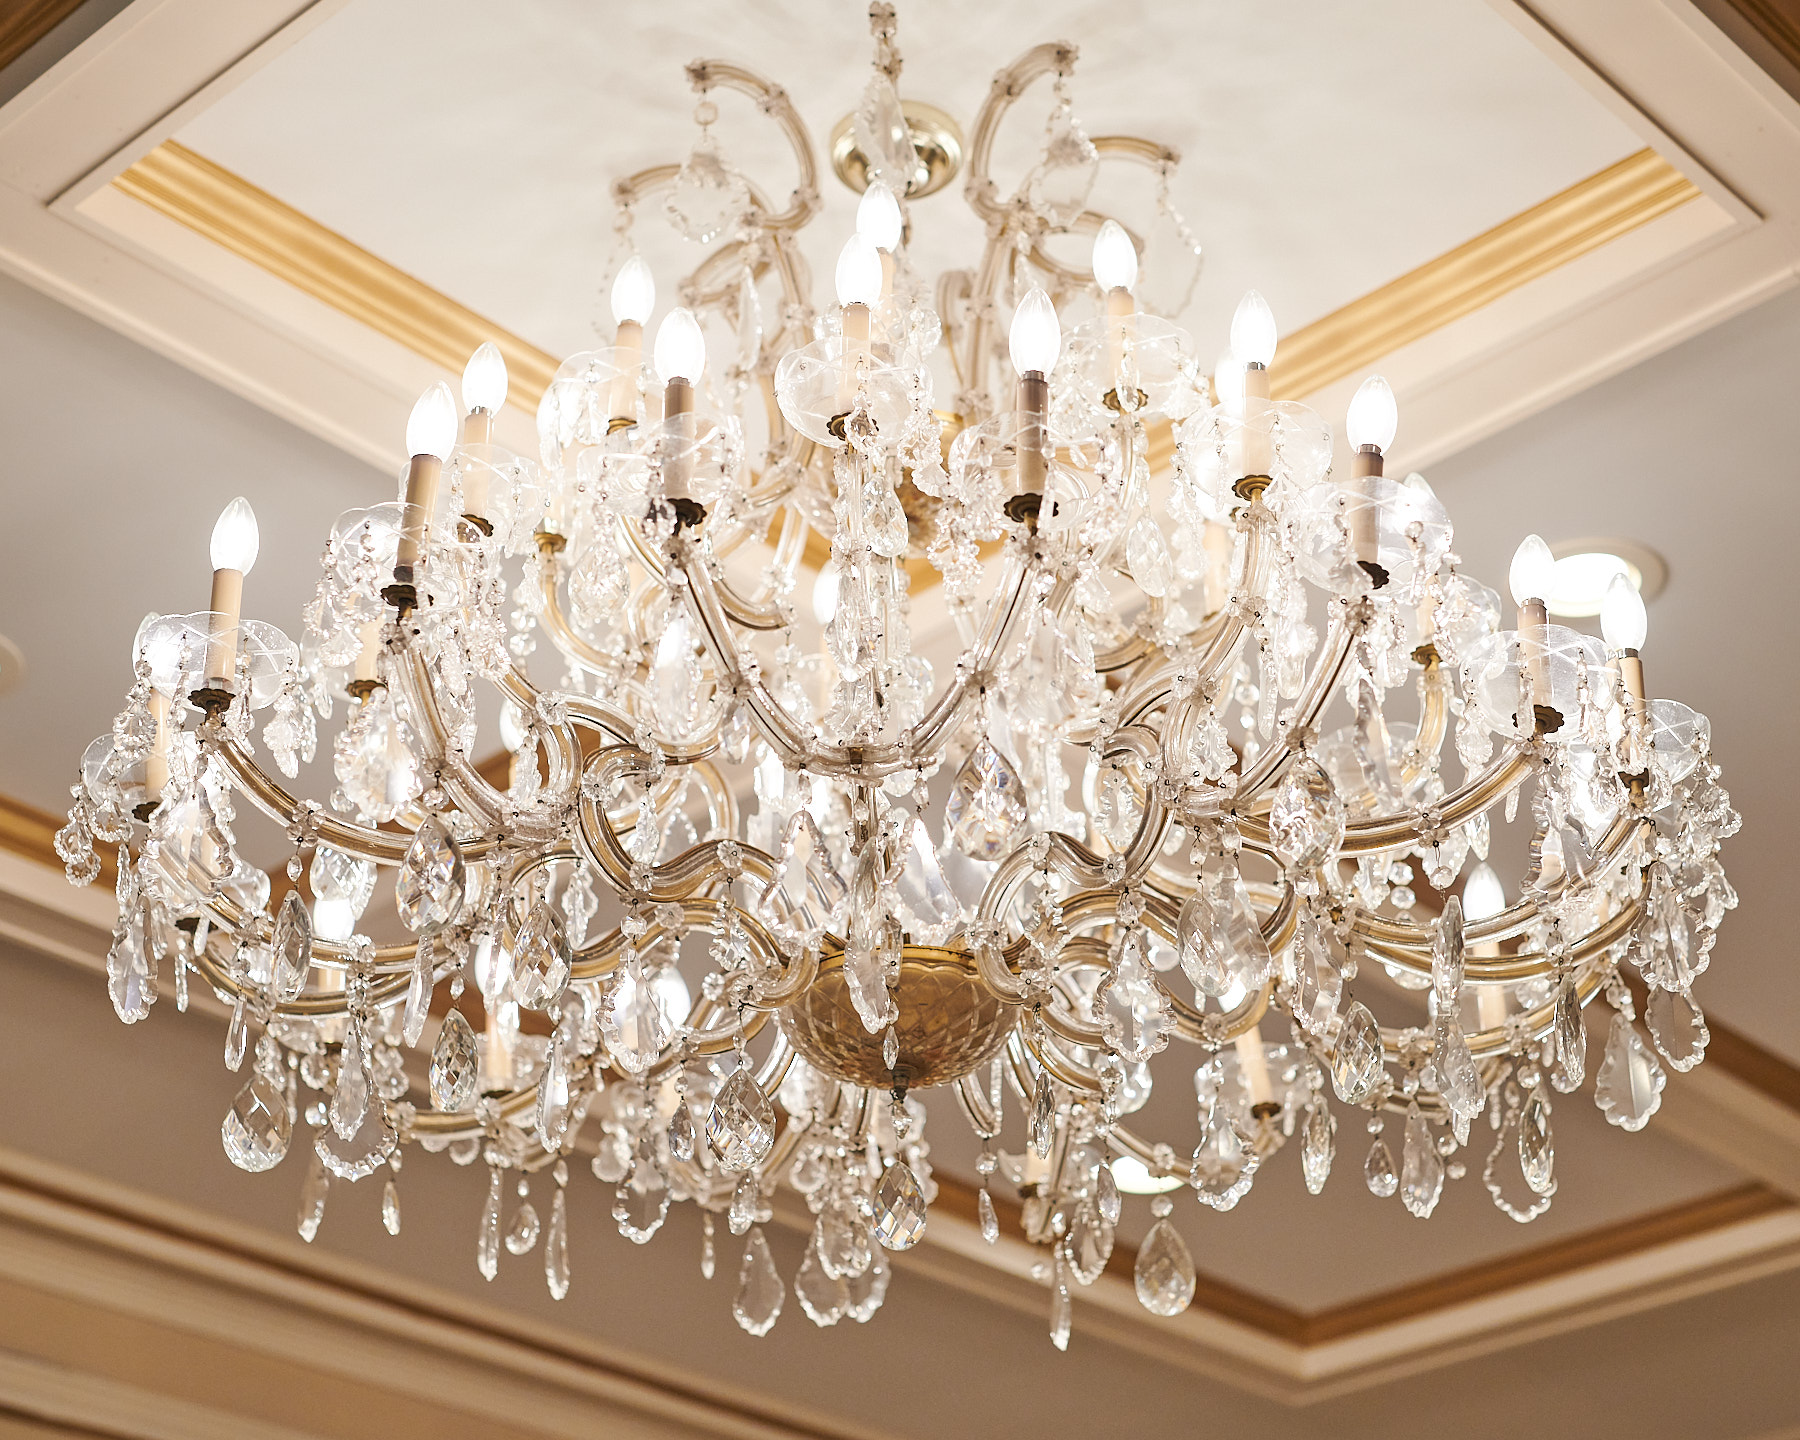 Chandelier detail inside the Classic Ballroom inside Greentree Country Club